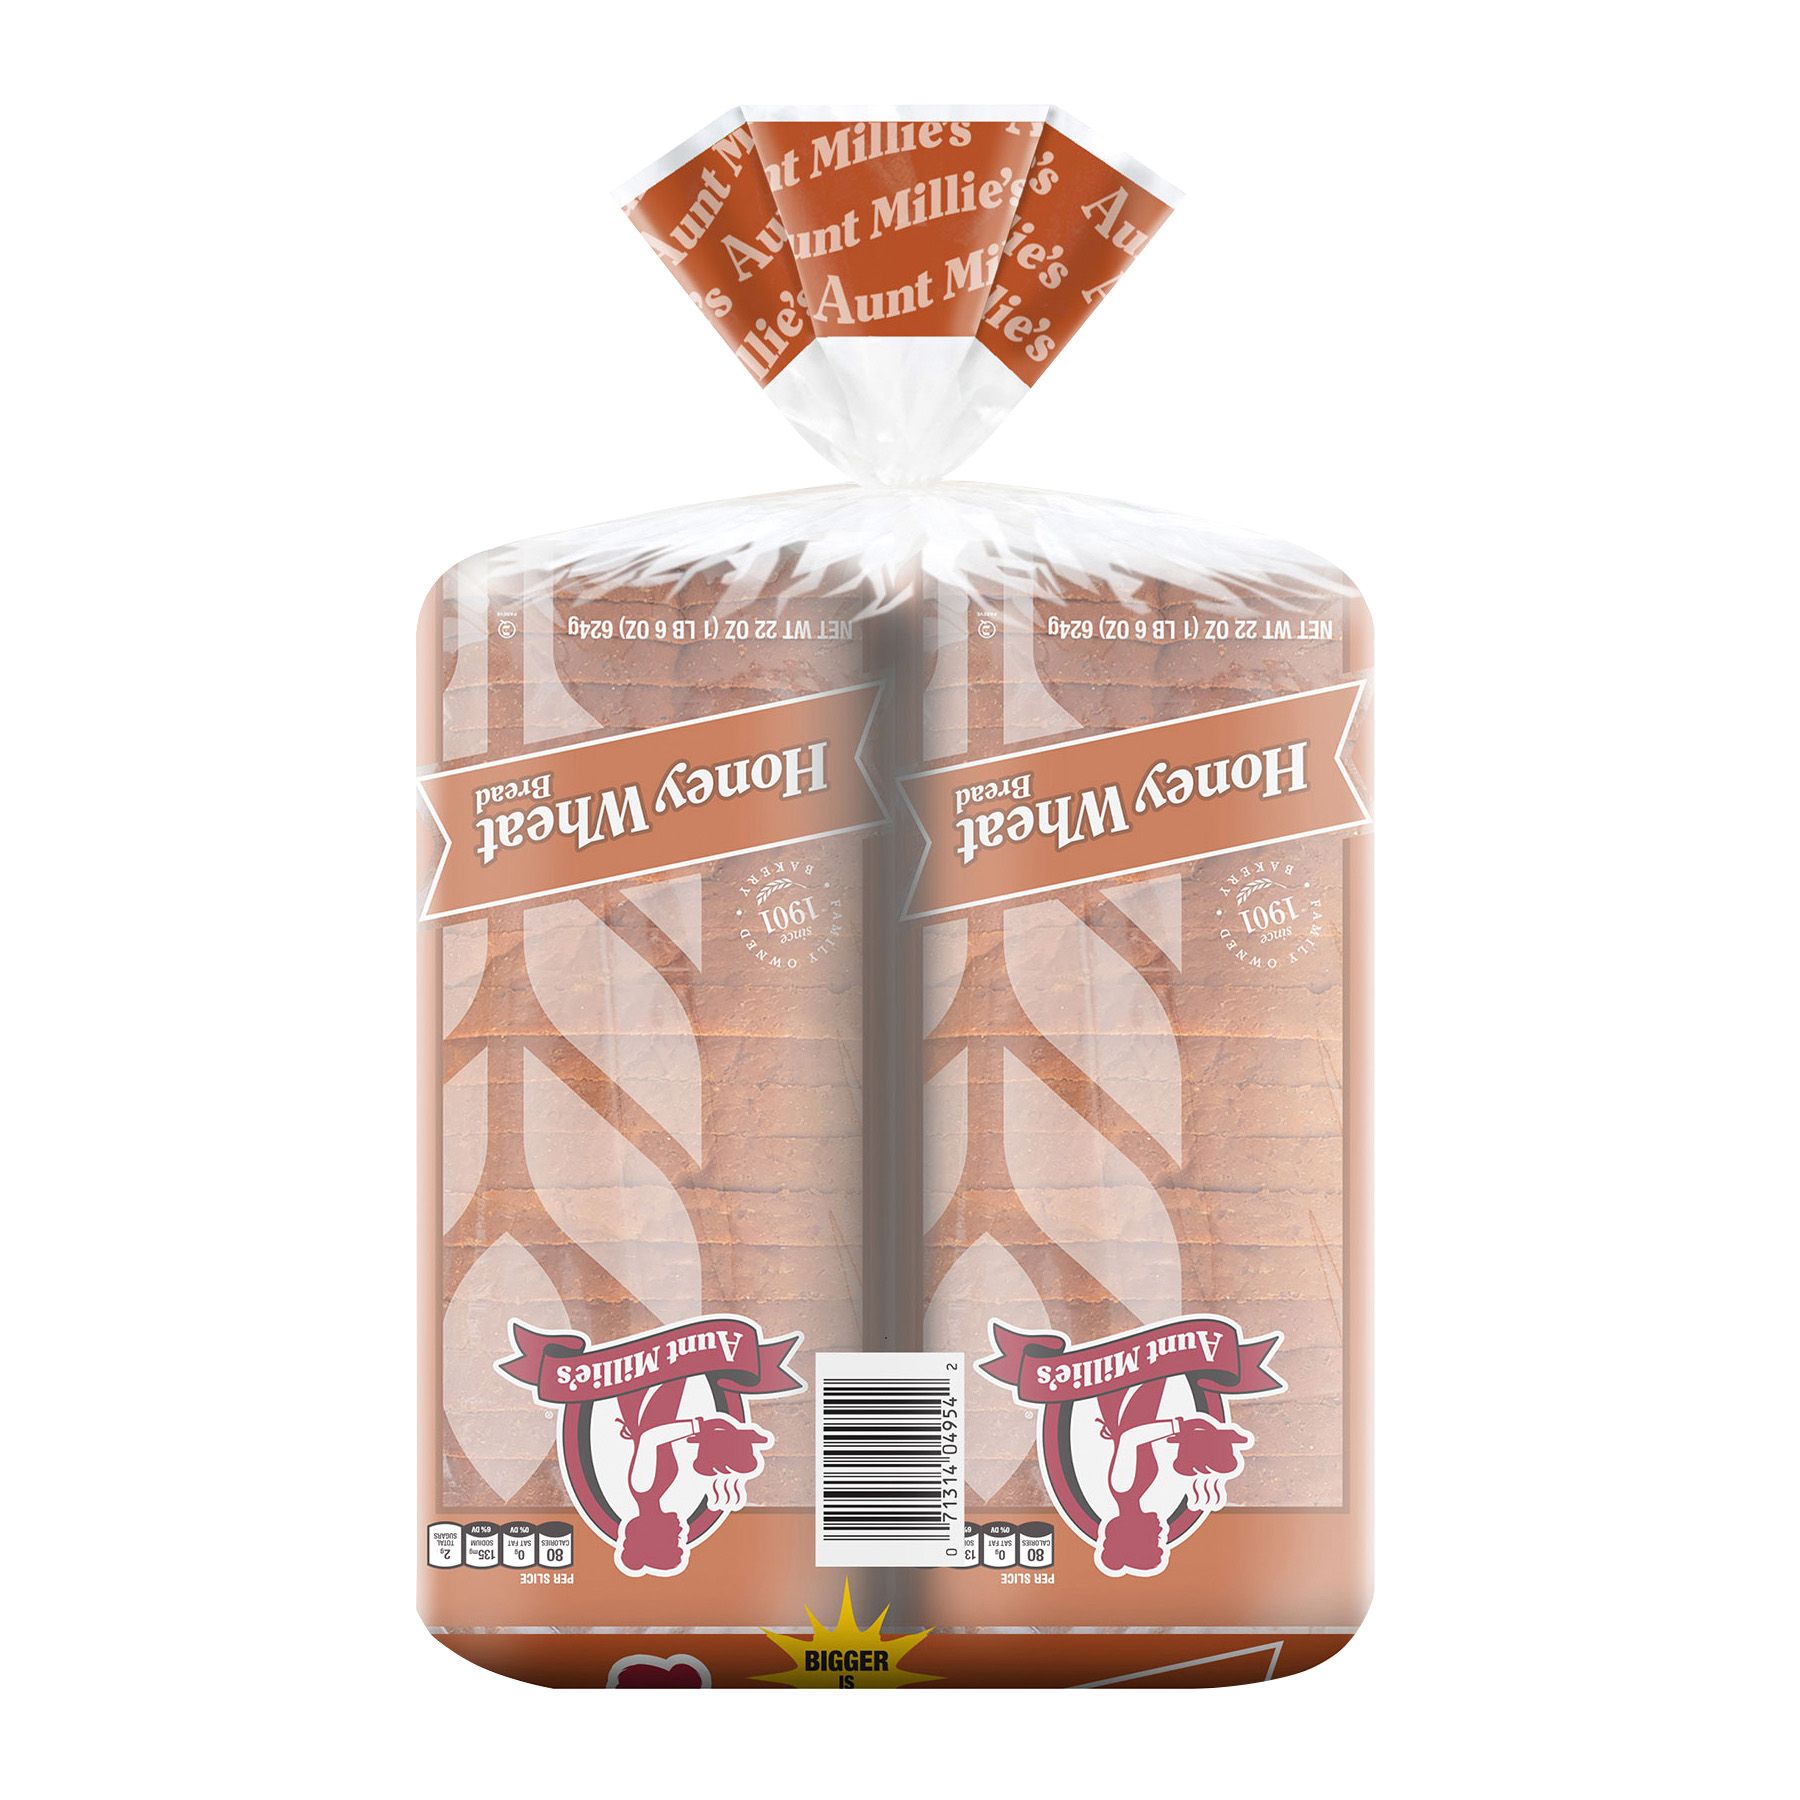 Aunt Millie's Honey Wheat Bread Twin Pack, 44 oz.